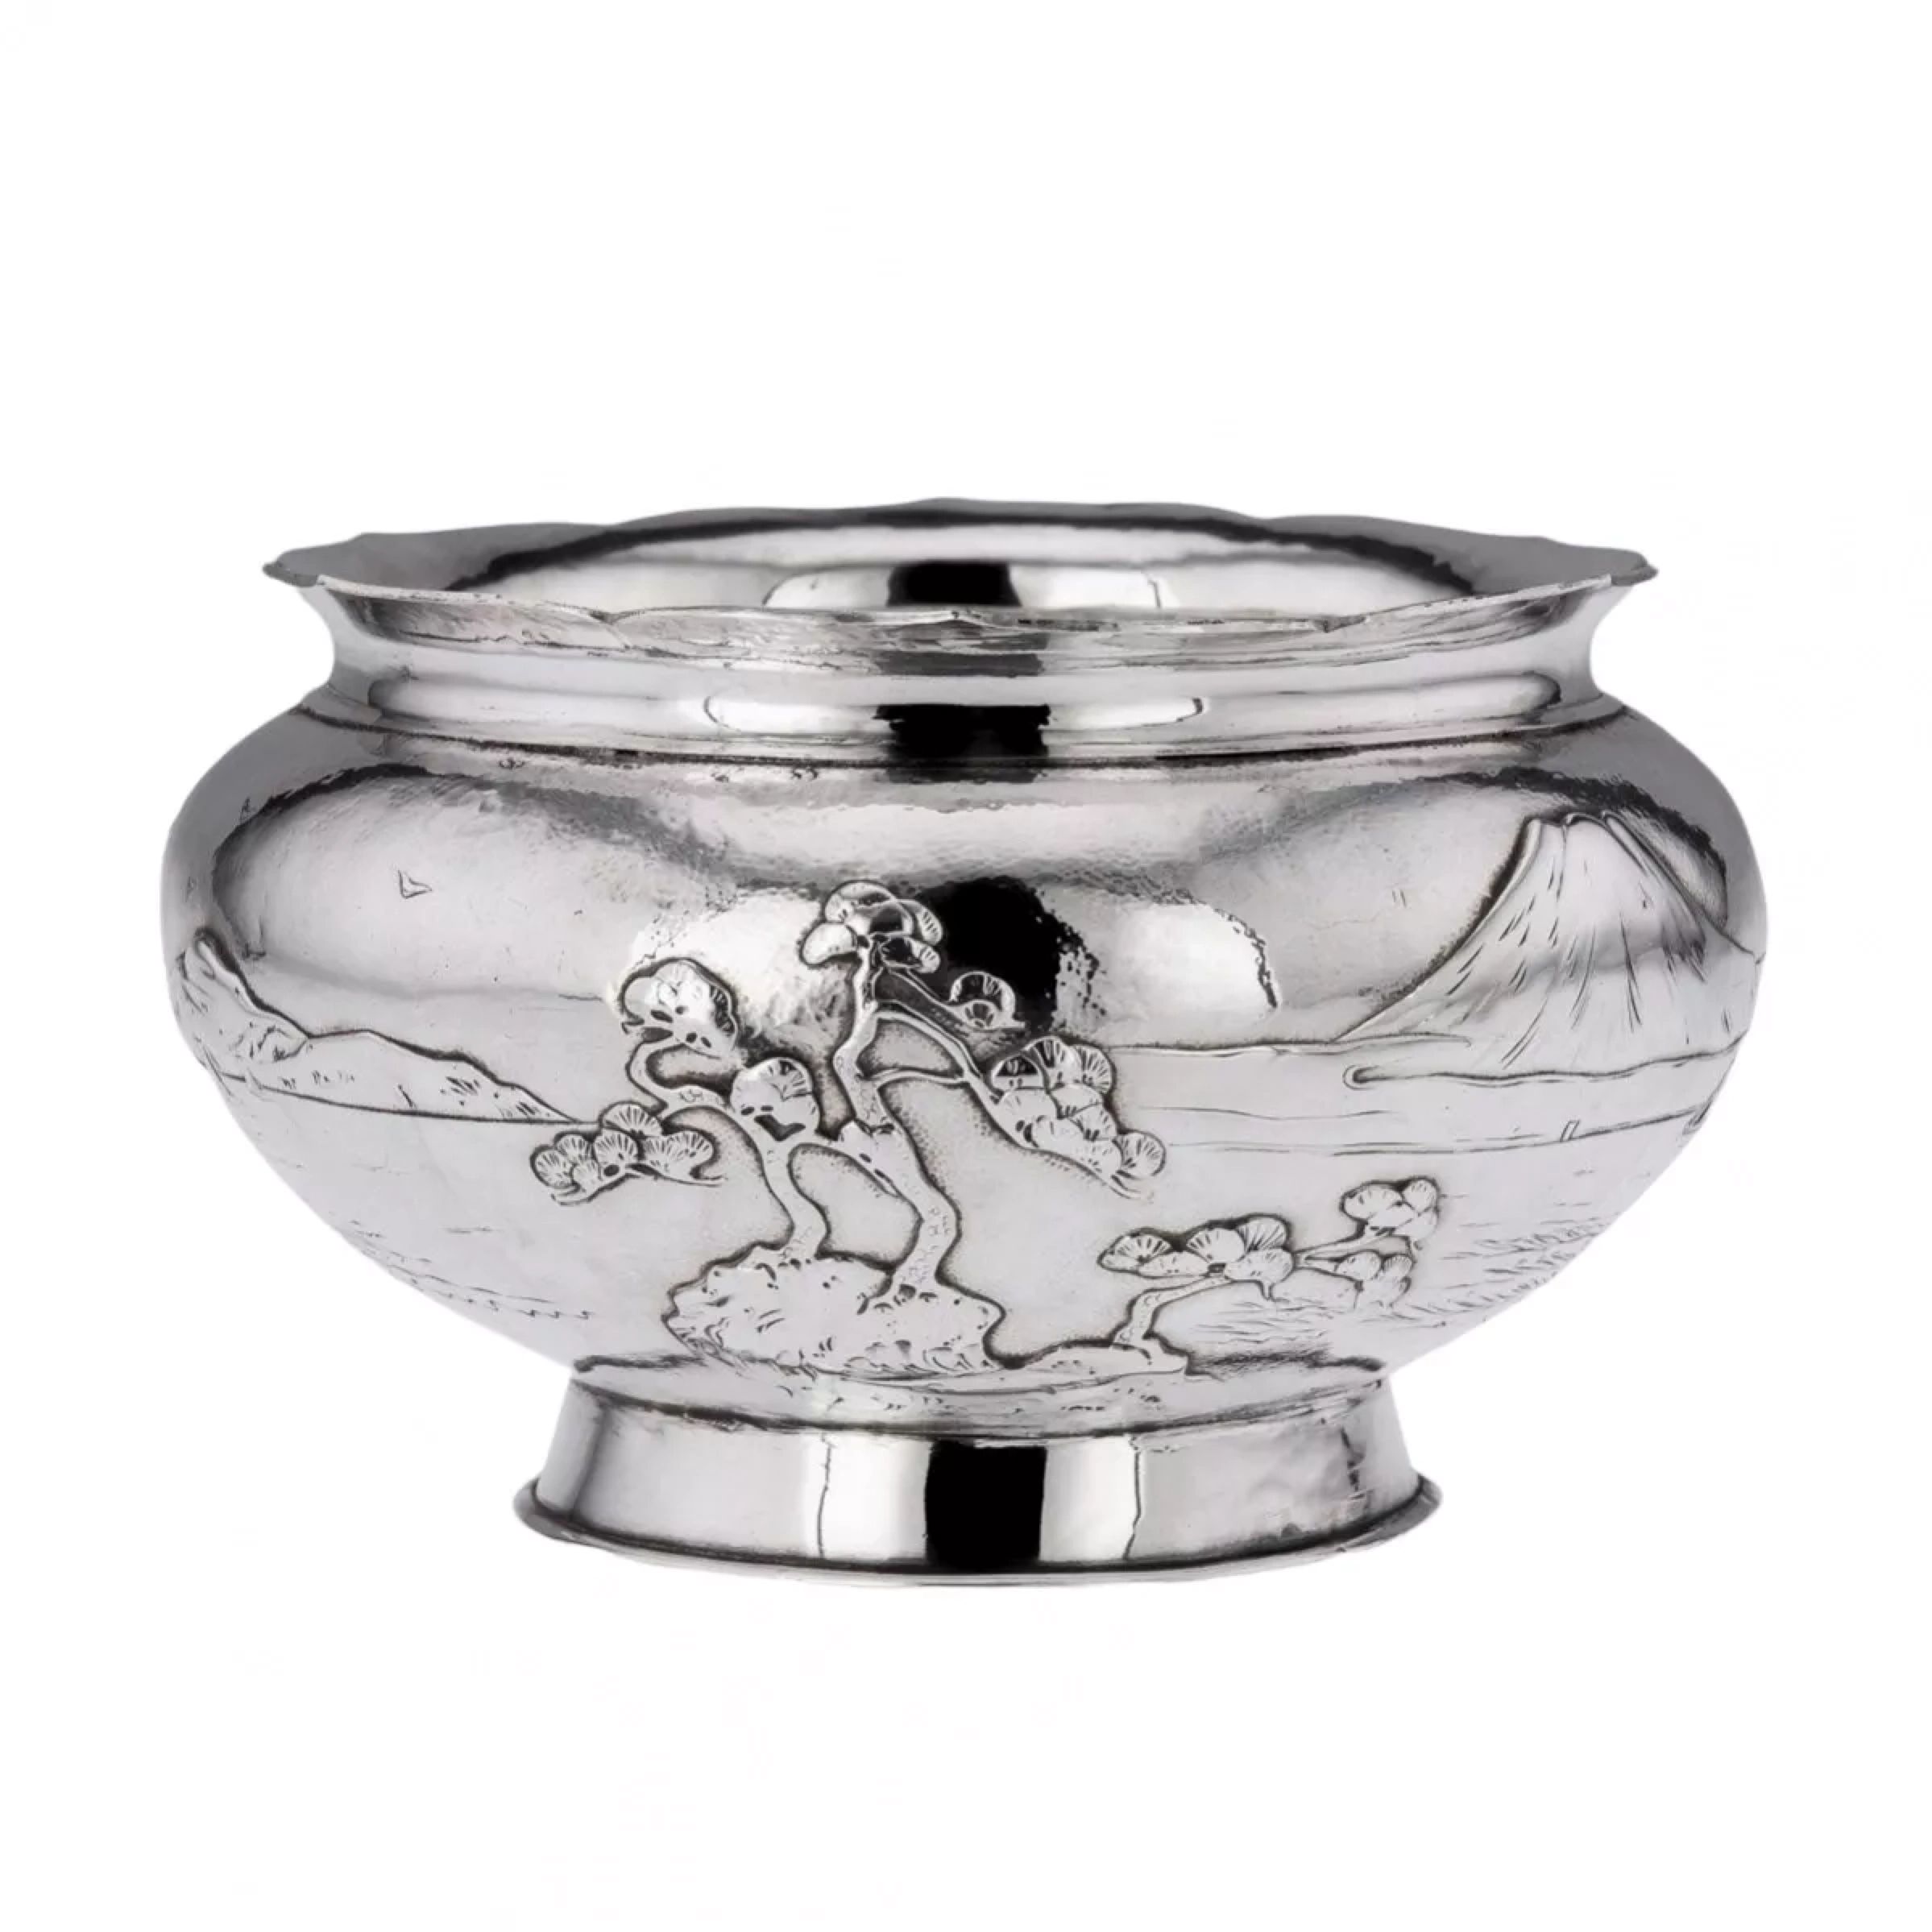 Japanese-silver-bowl-from-the-Meiji-period-20th-century-